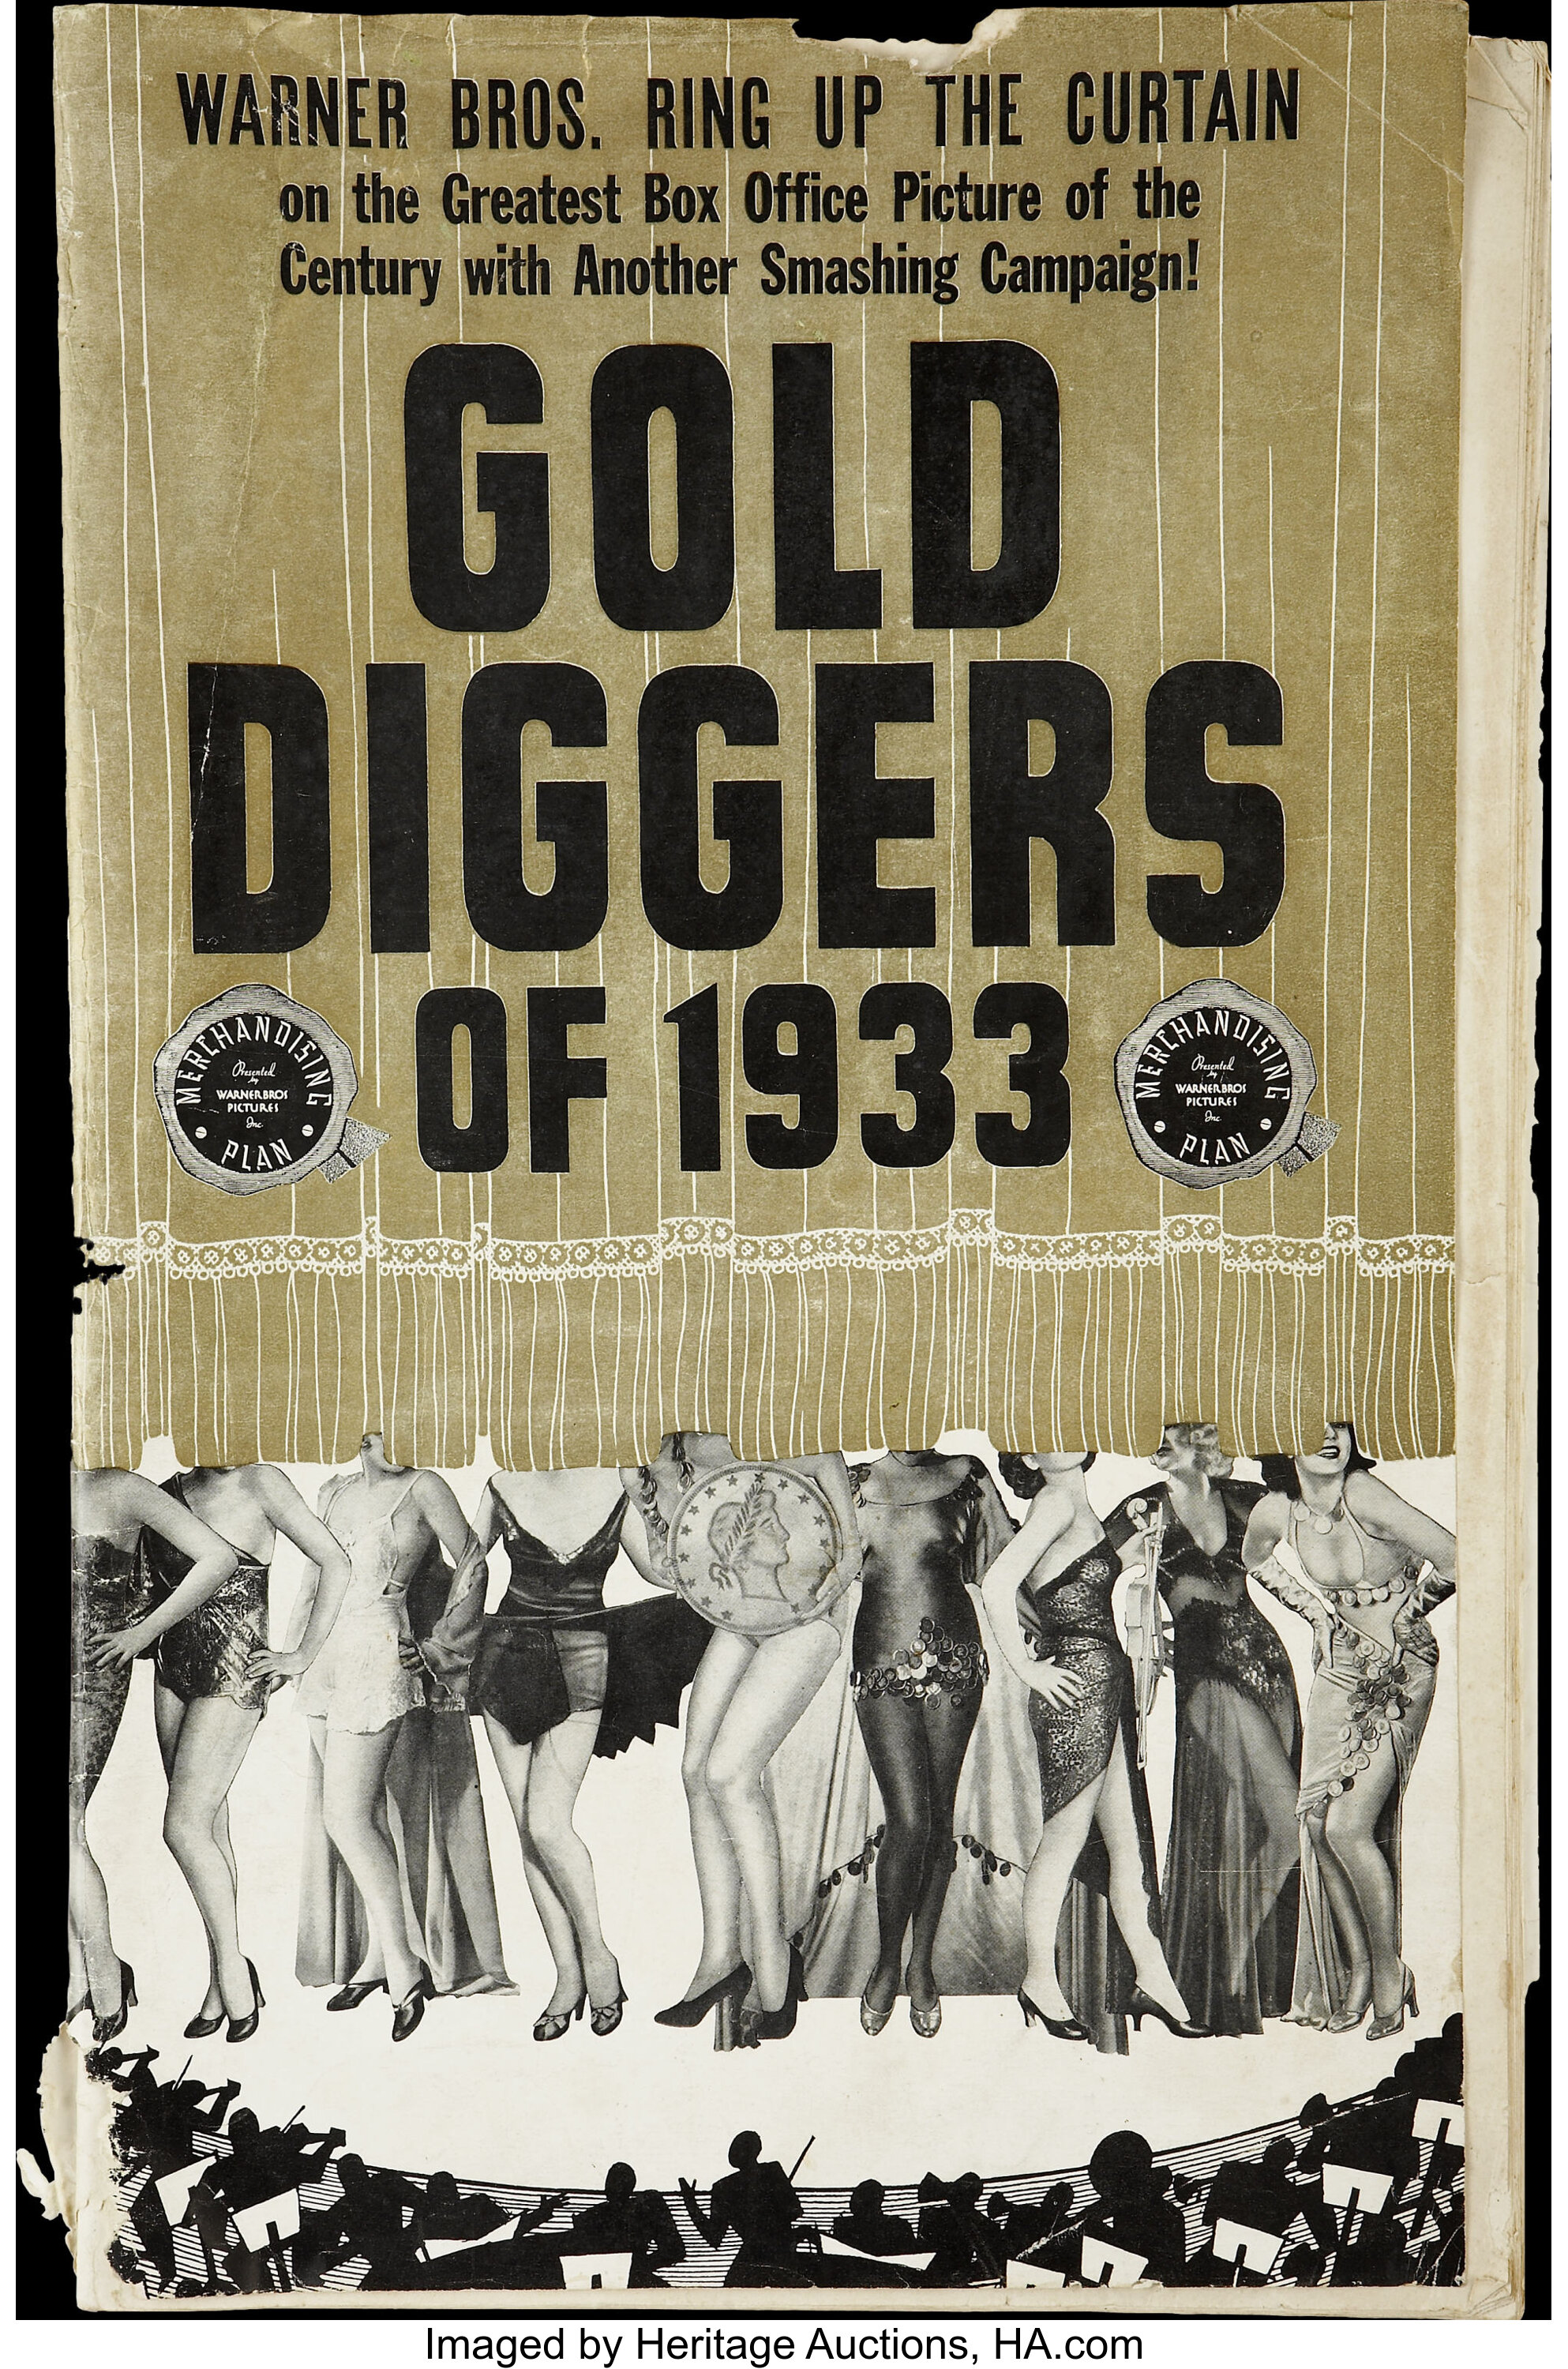 File:Gold Diggers of 1933 (half-sheet poster).jpg - Wikimedia Commons